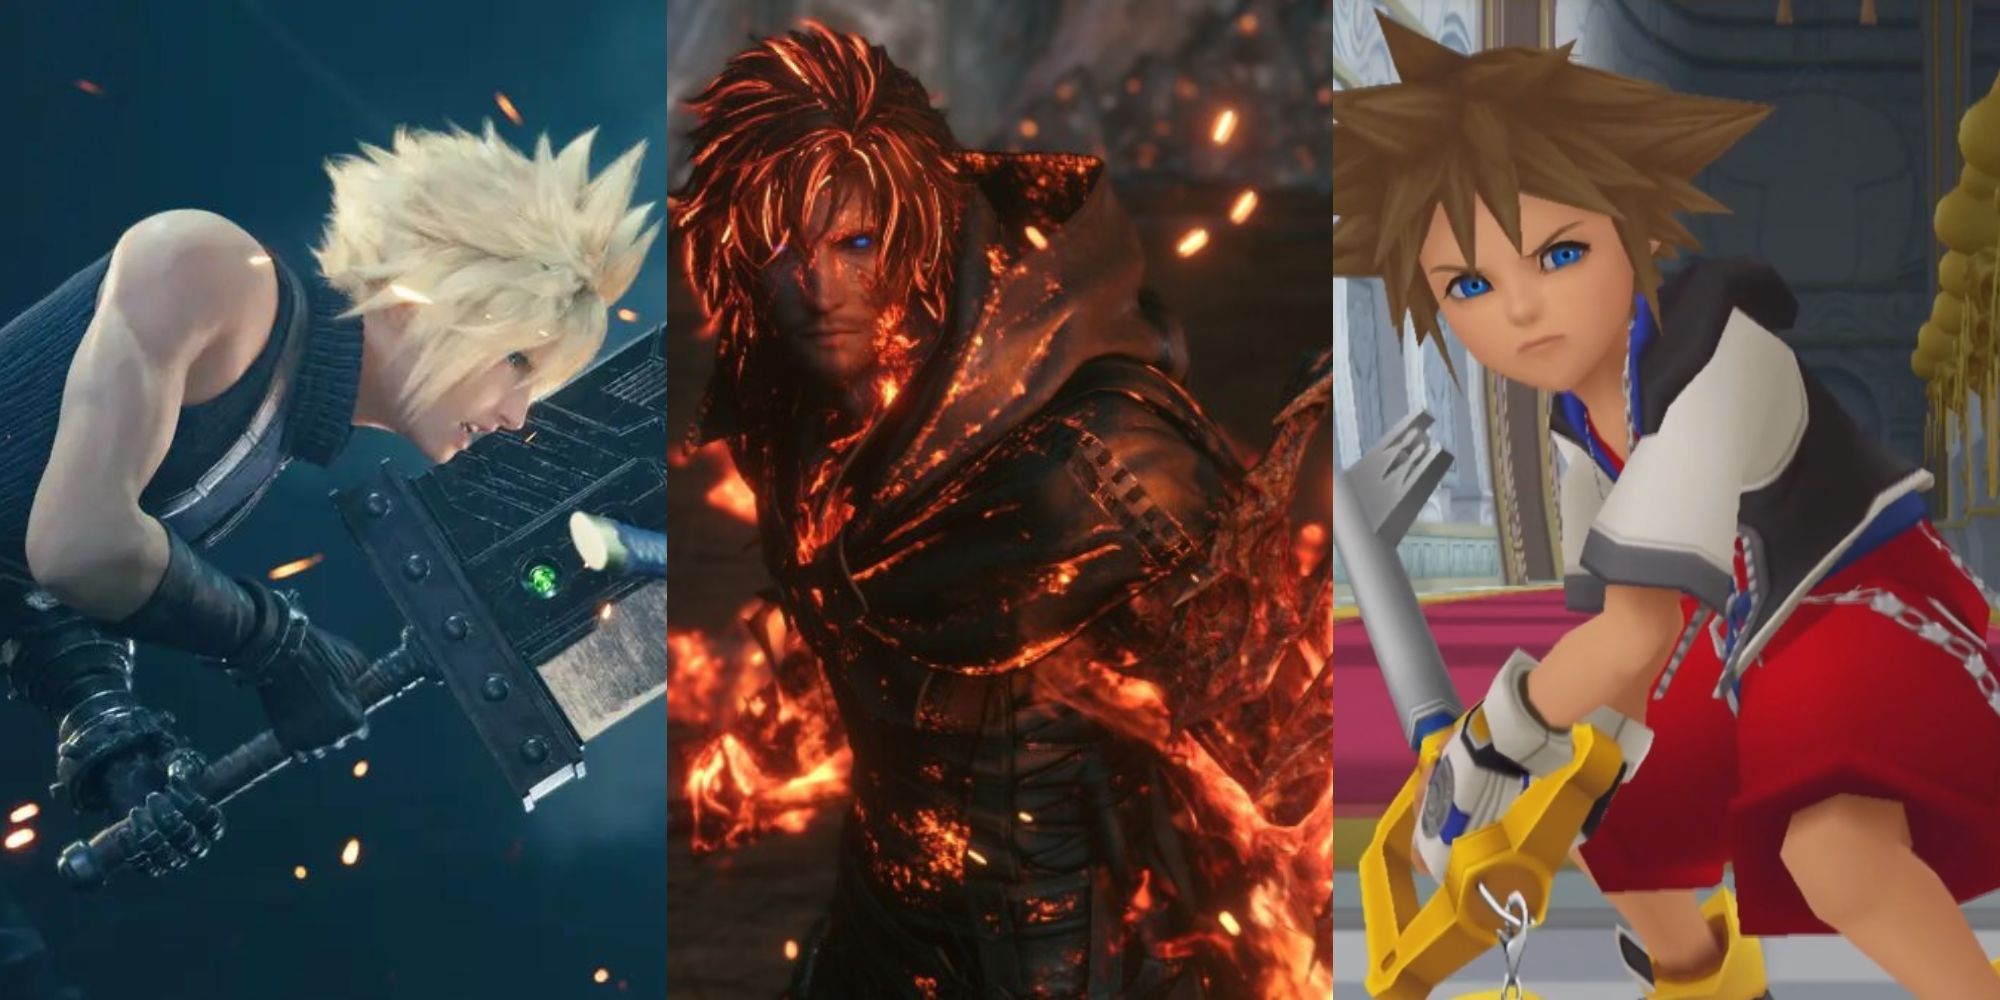 A collage of some of Square Enix's best Action RPGs: Final Fantasy 7 Remake, Final Fantasy 16 and the Kingdom Hearts series.